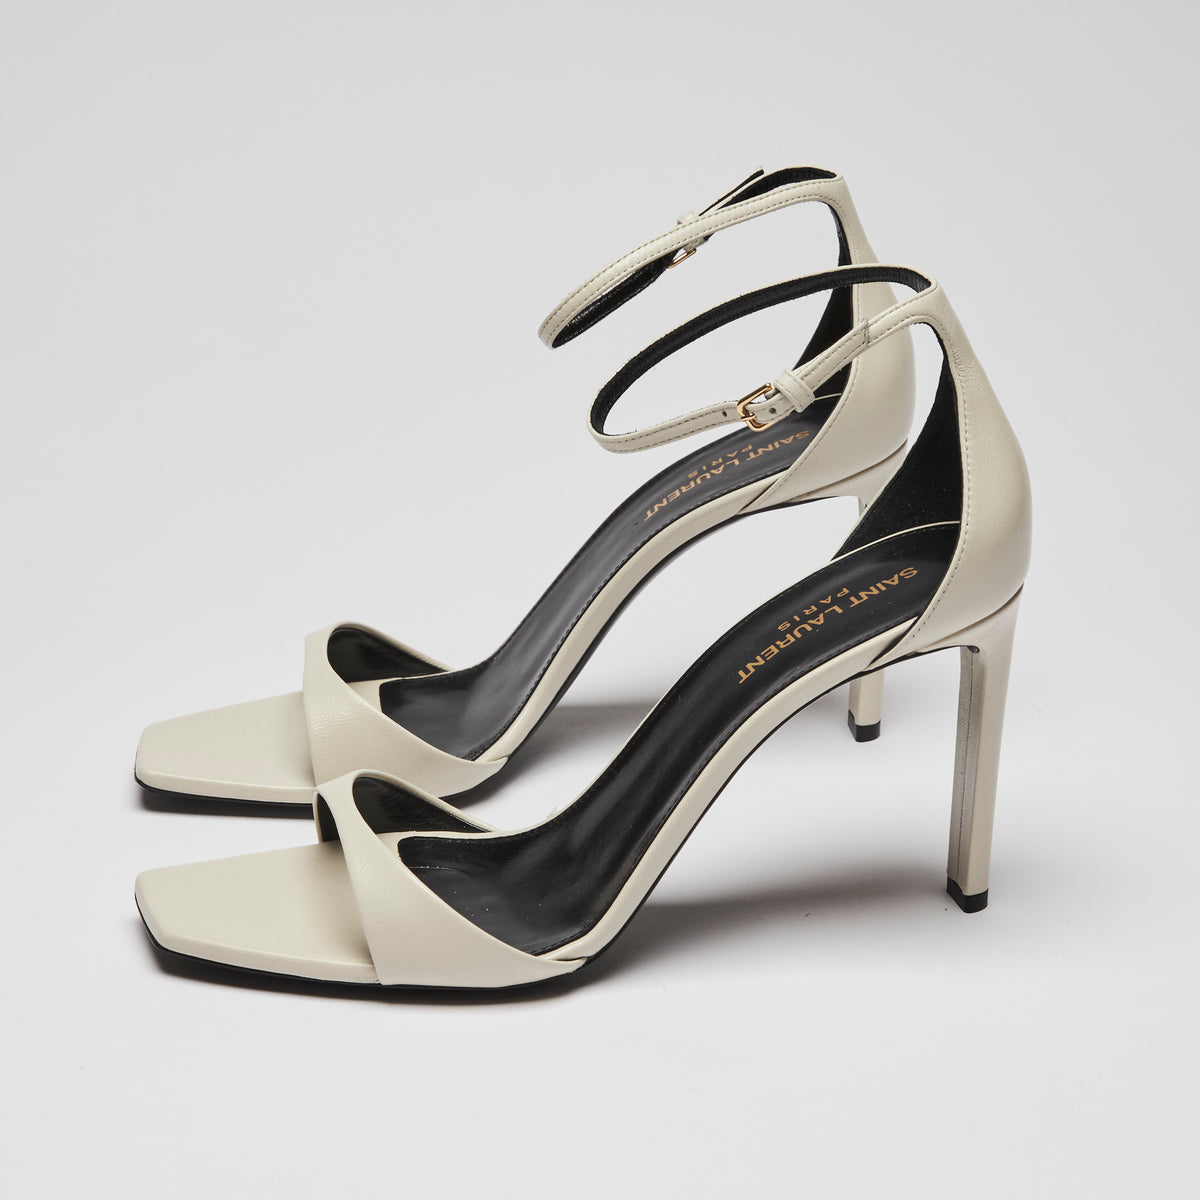 Excellent Pre-Loved White Leather Strappy Open Toe Sandals with Ankle Straps.(side)